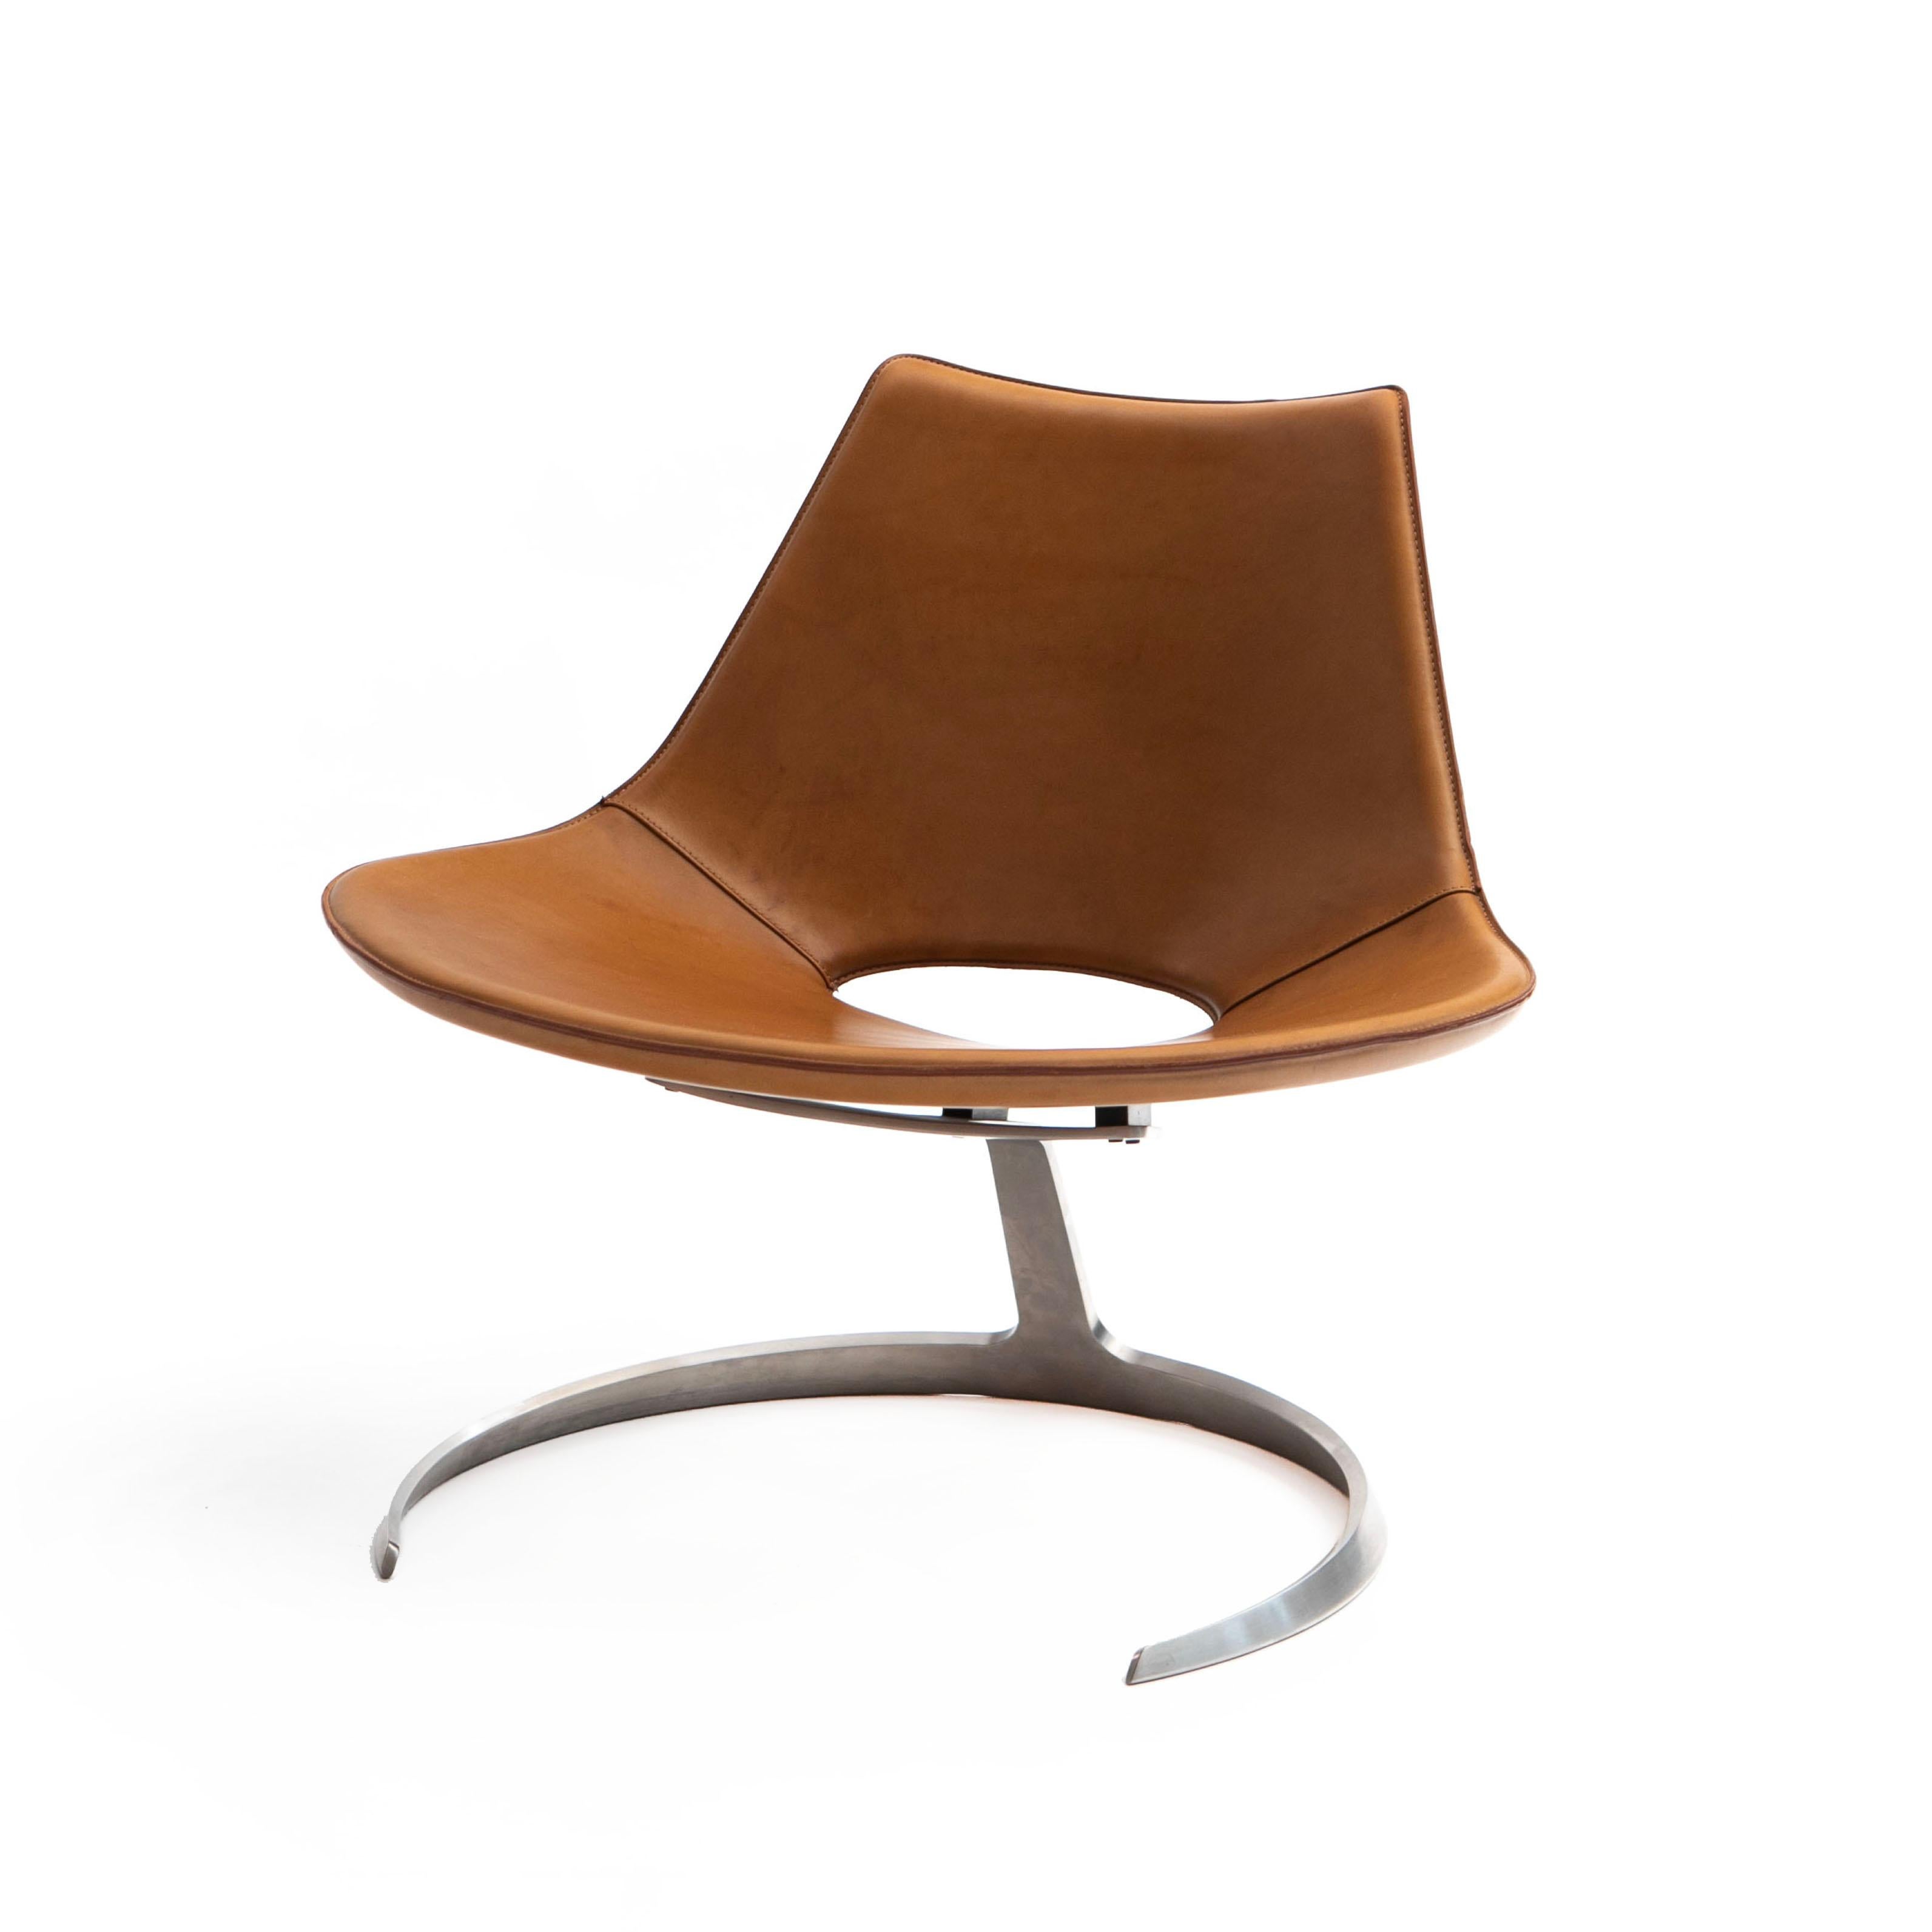 Fabricius and Kastholm 'Scimitar' Lounge Chair in Cognac Leather In Good Condition For Sale In Kastrup, DK